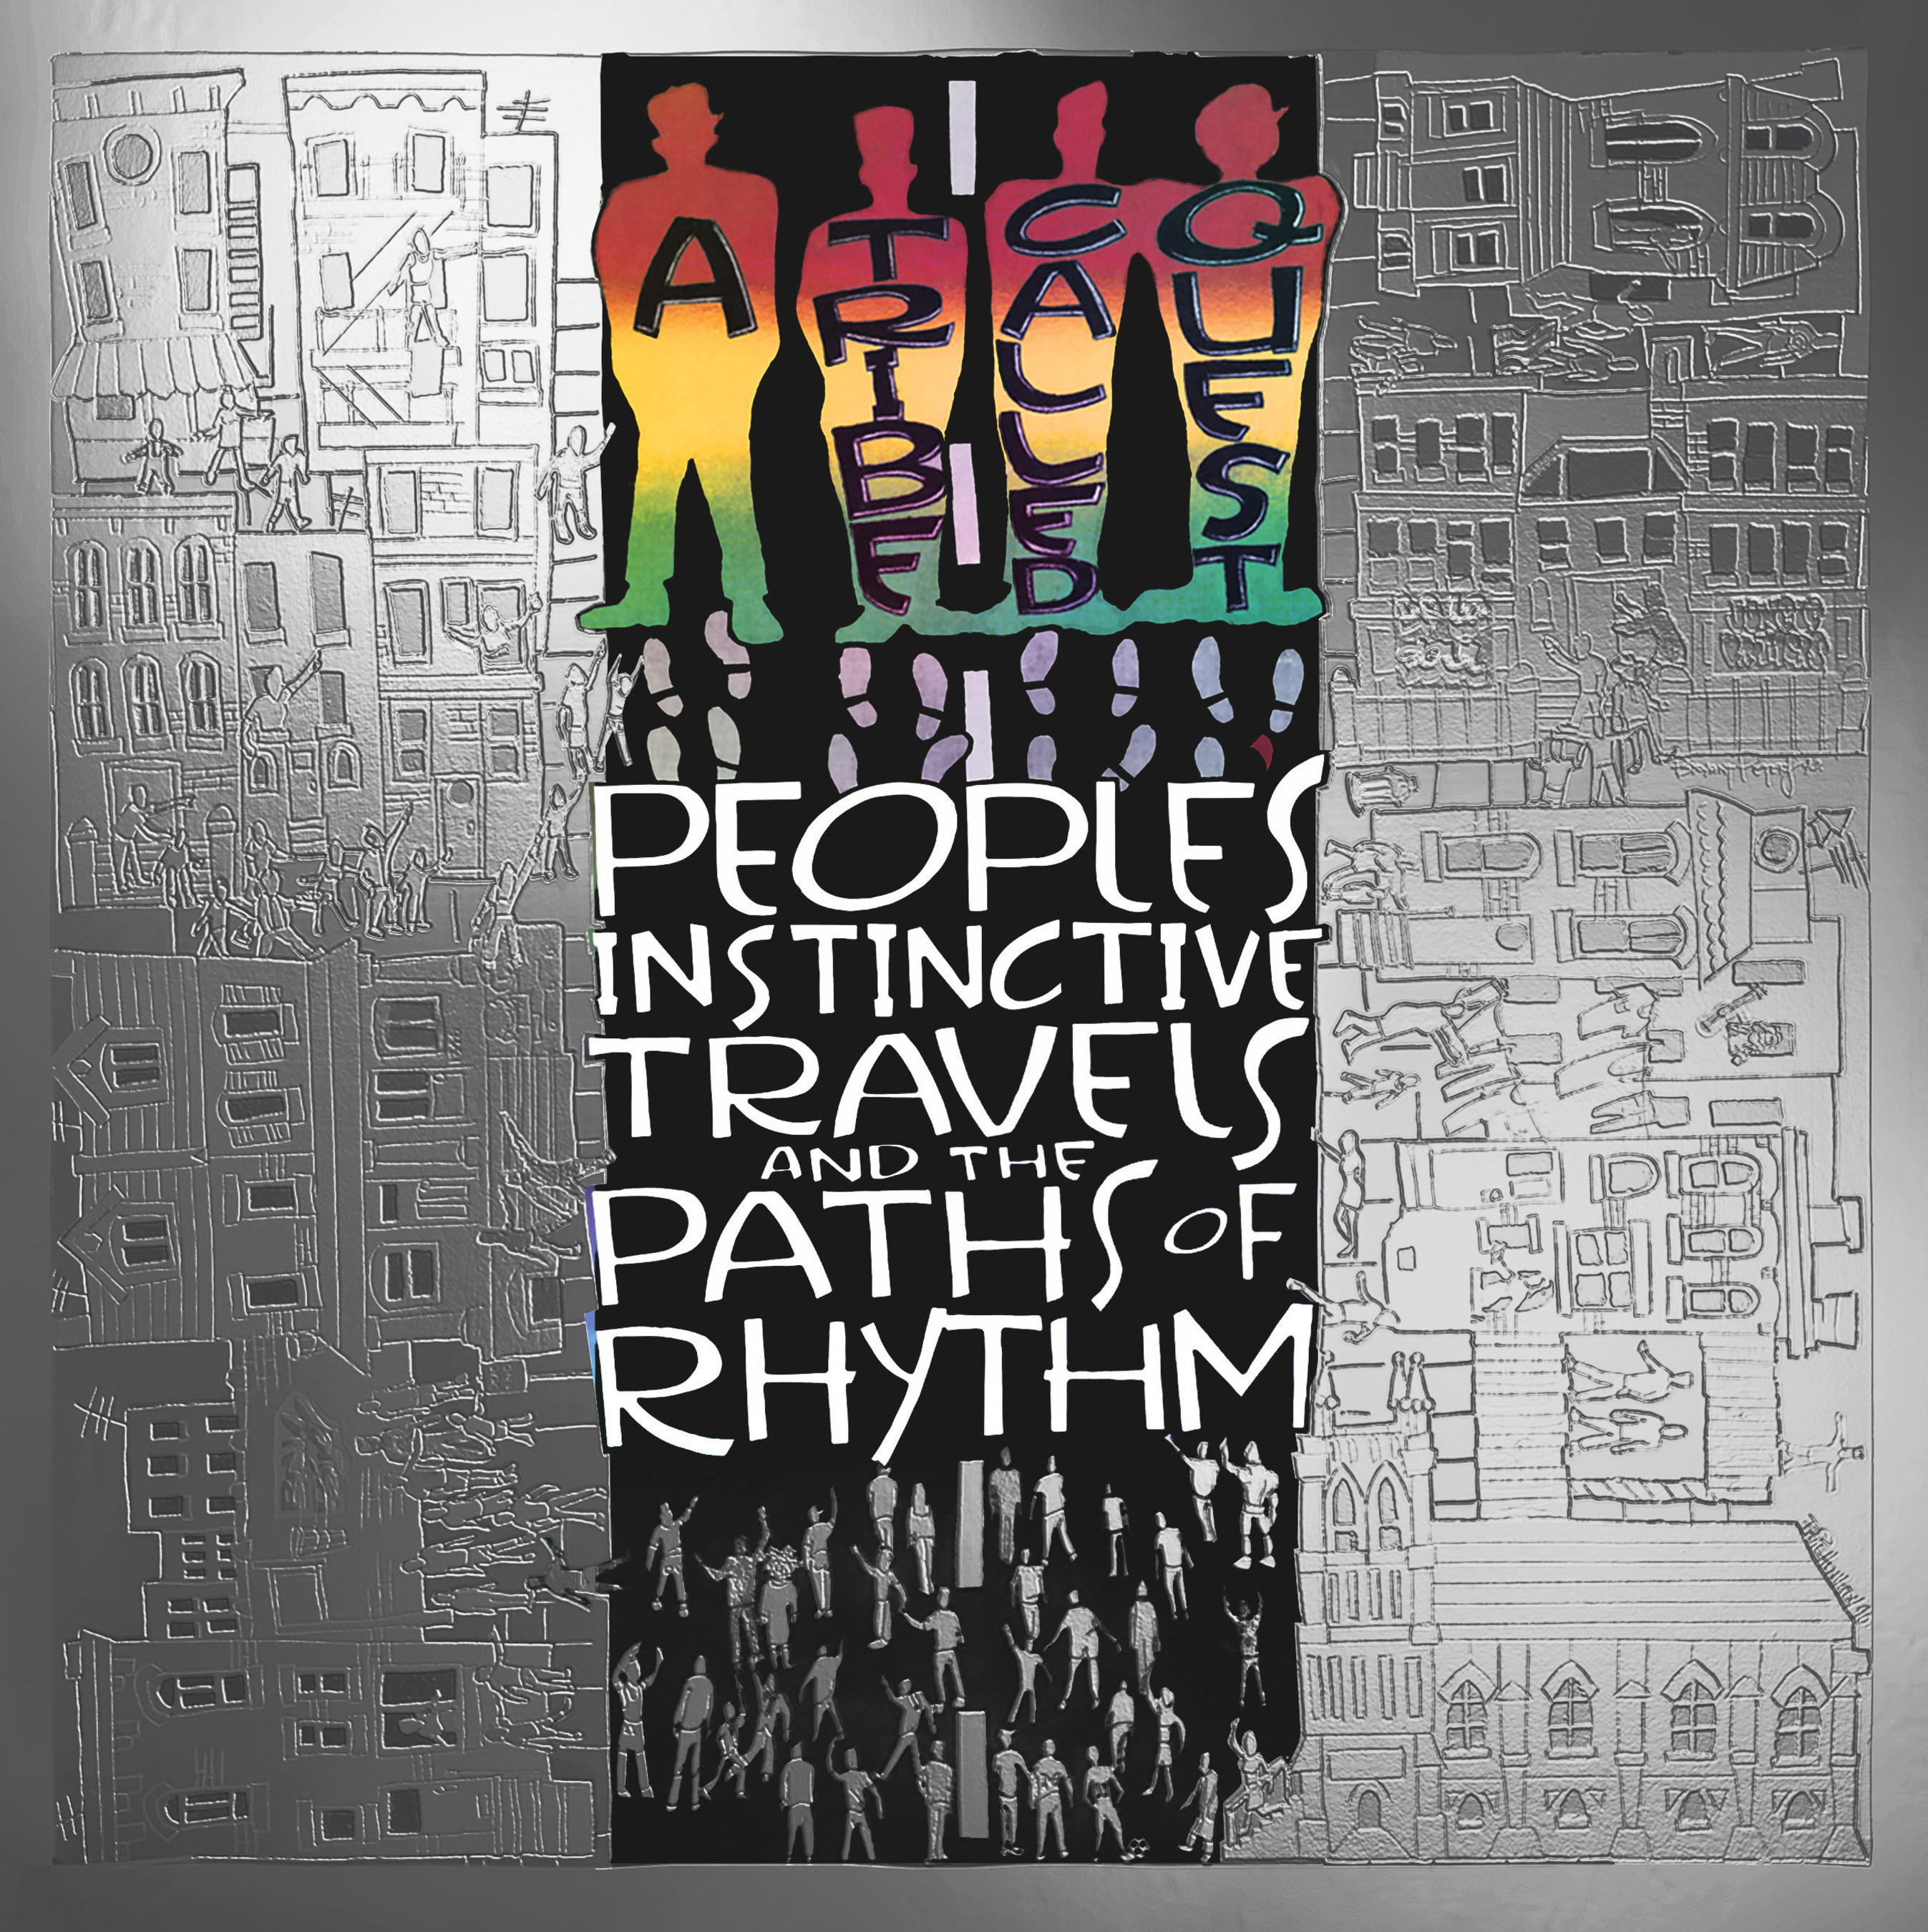 In celebration of the 25th anniversary 'Peoples' Instinctive Travels And The Paths of Rhythm' will be released on November 13th